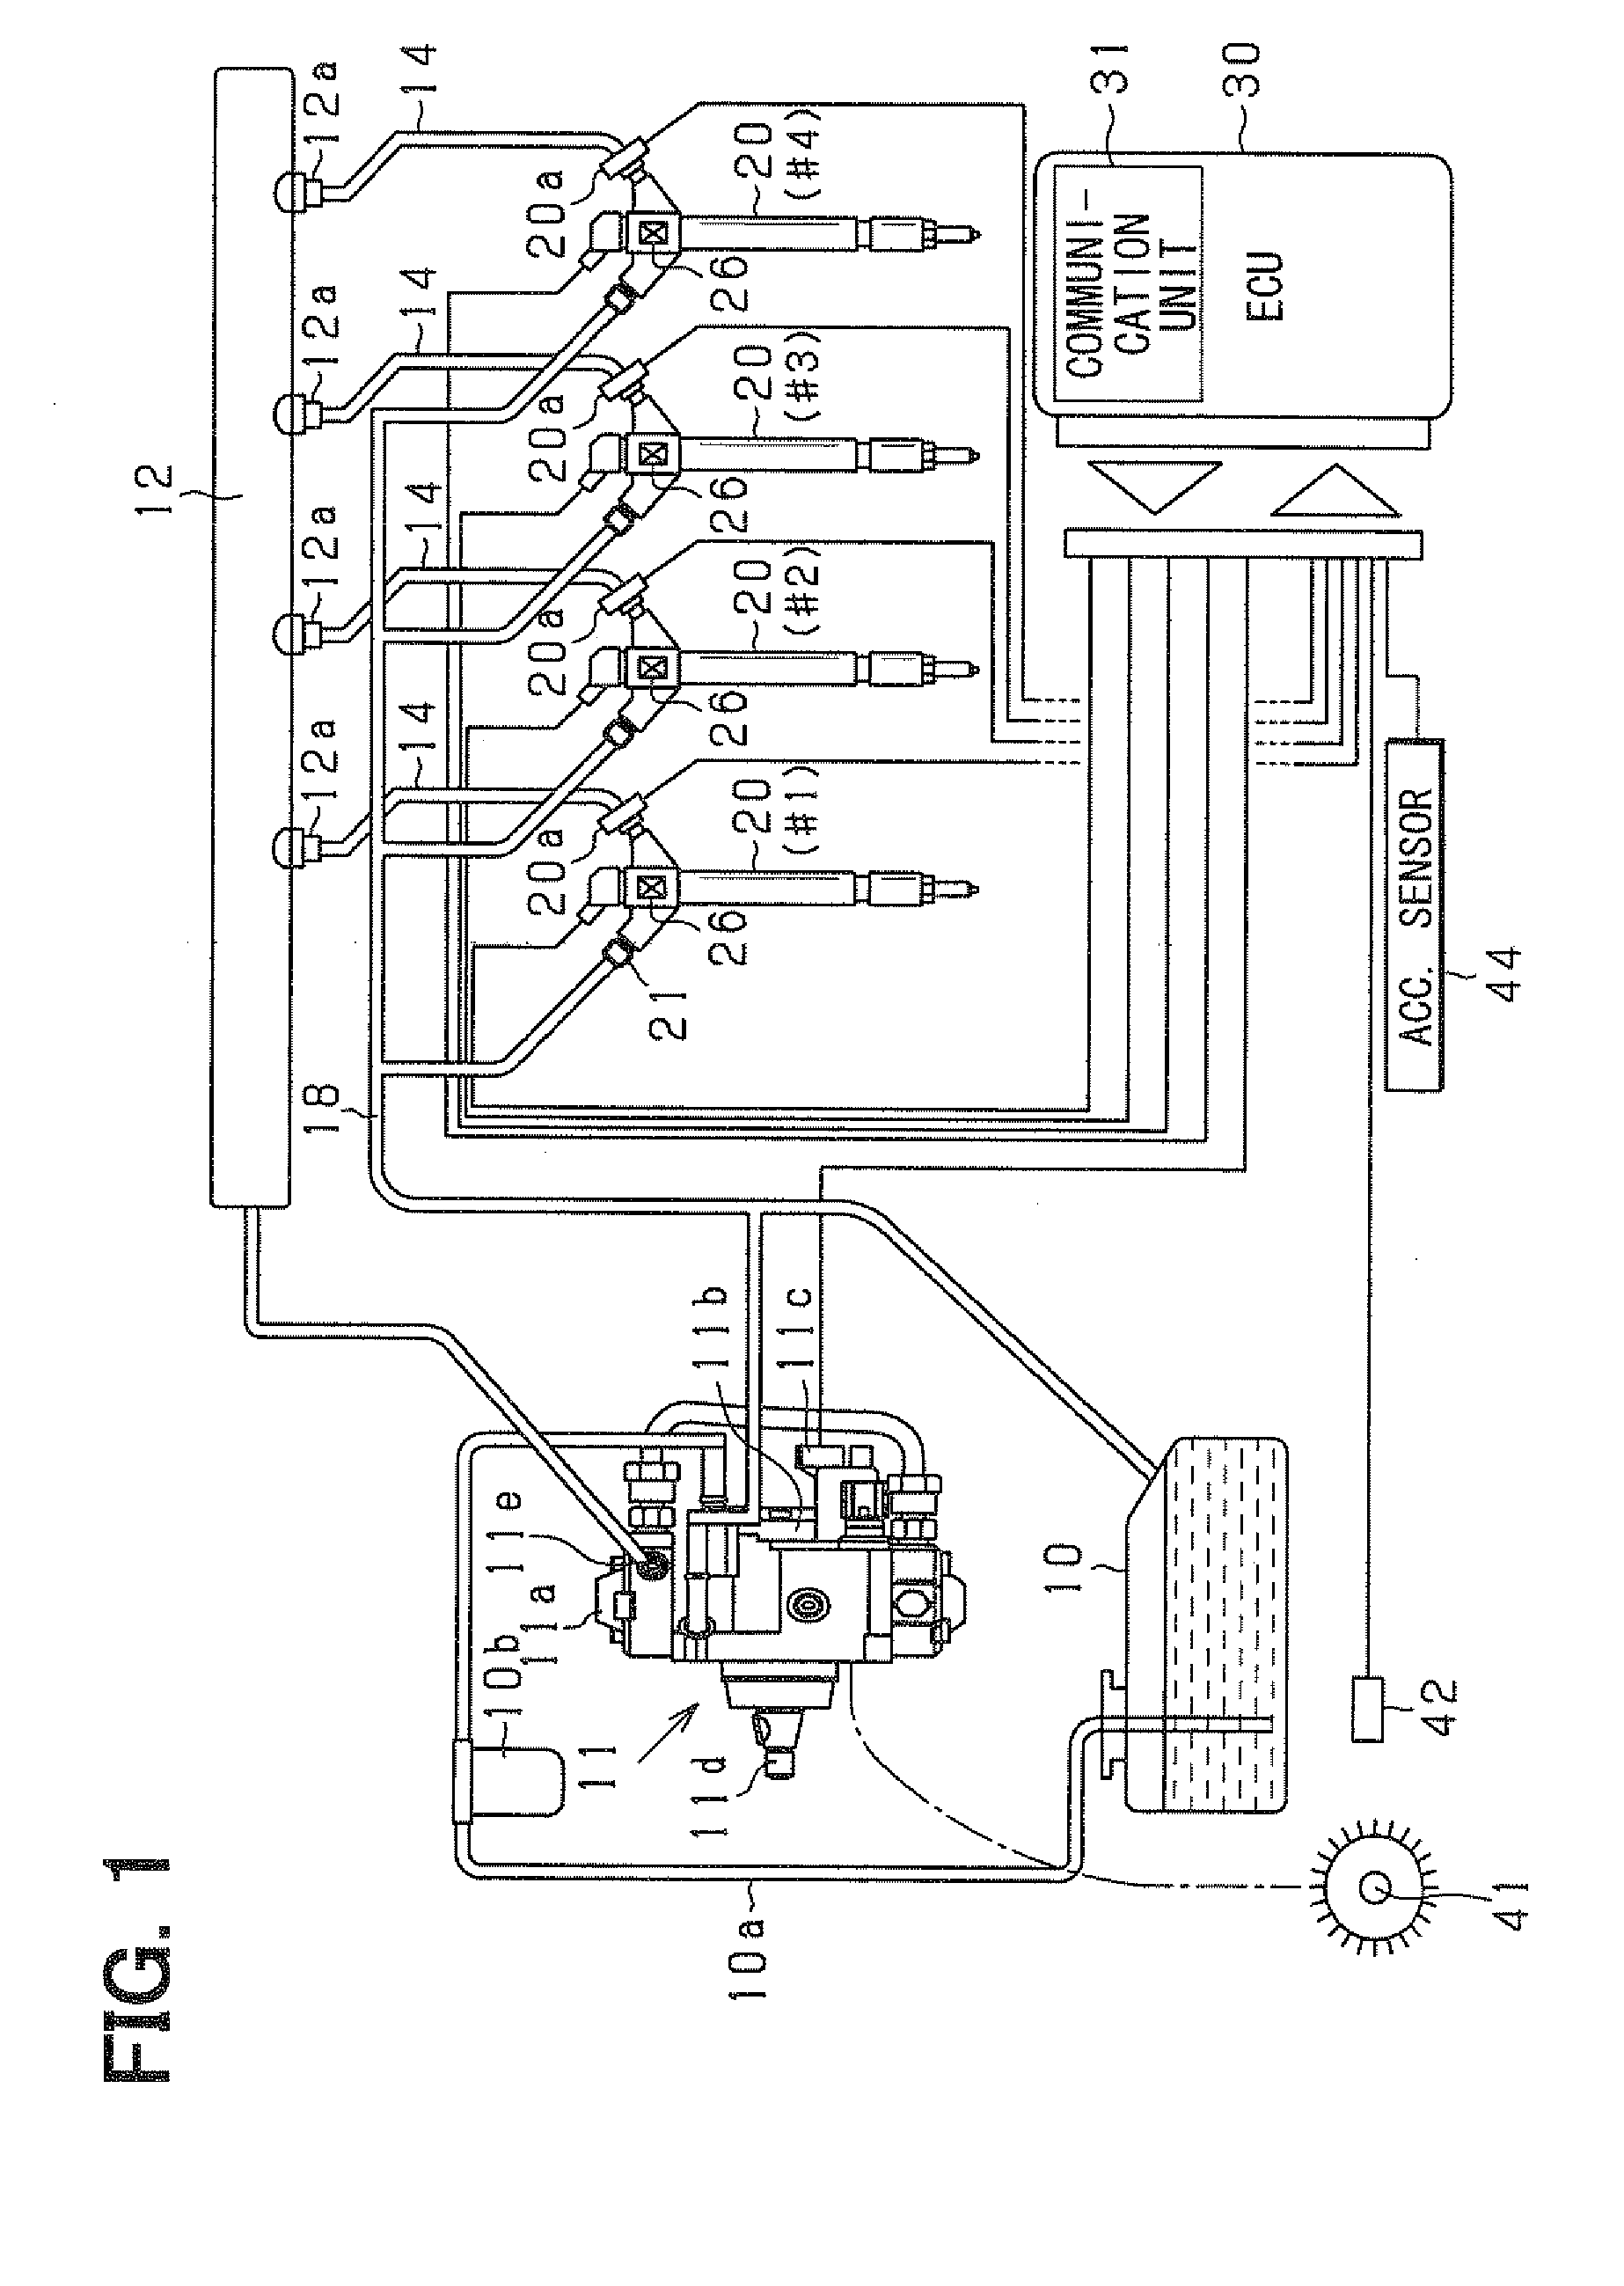 Fuel injection device and fuel injection system